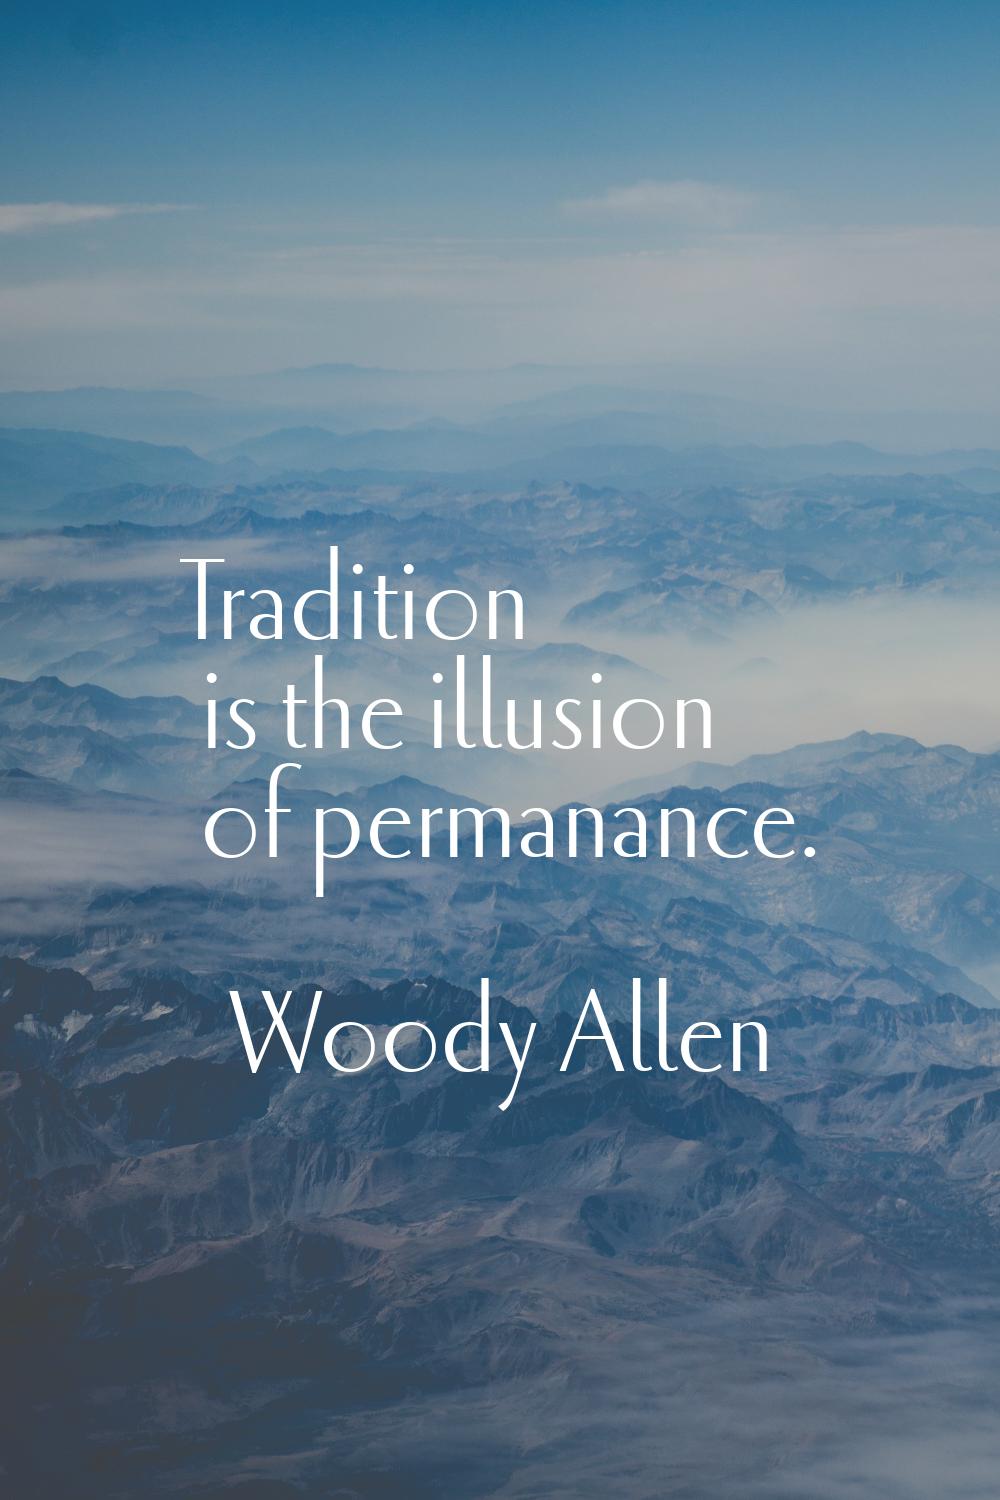 Tradition is the illusion of permanance.